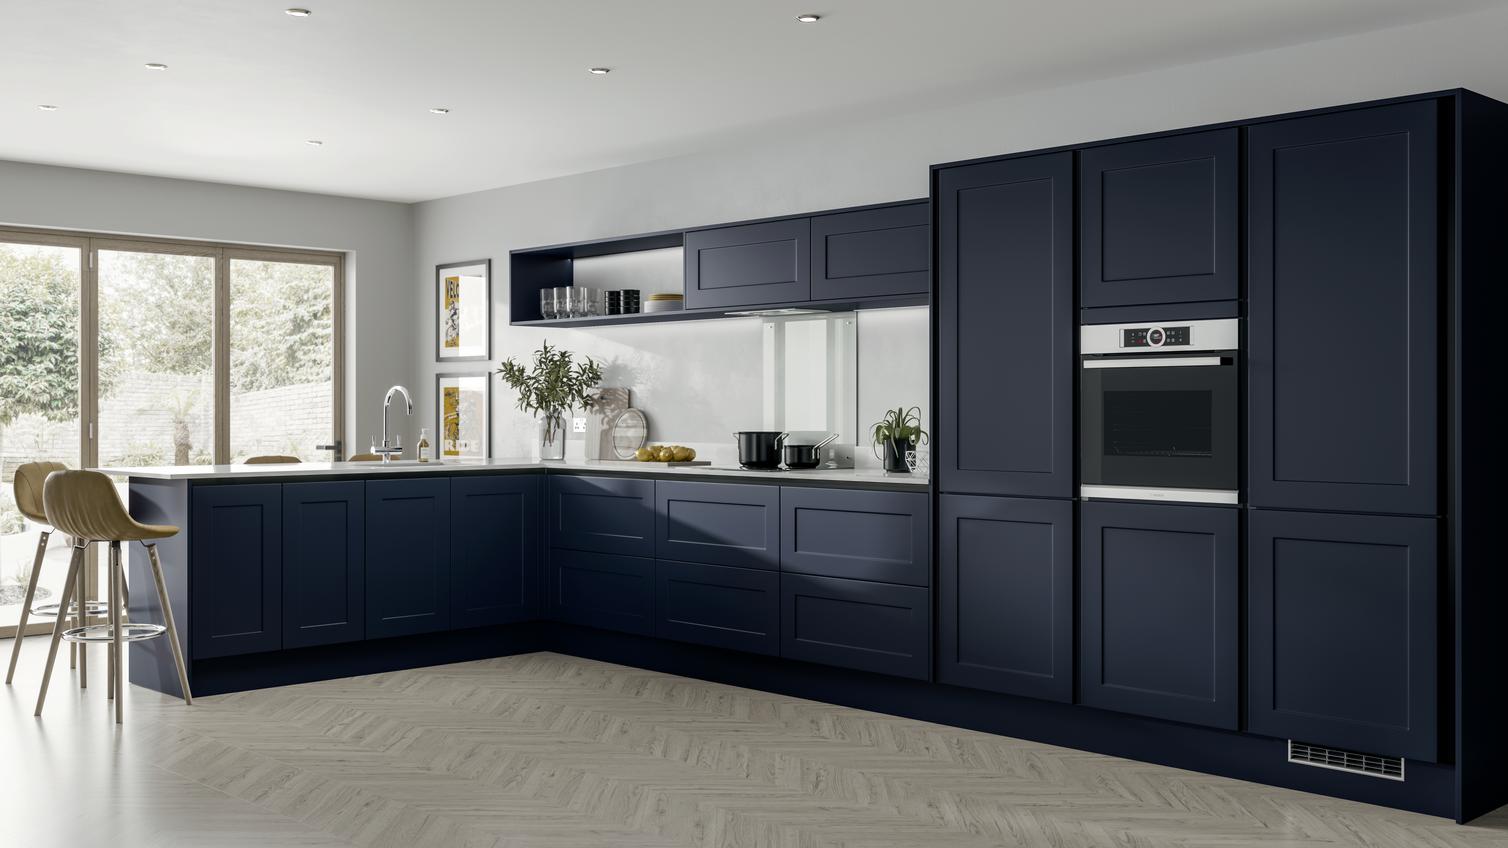 L-shape modern shaker style blue kitchen idea with handleless cabinets. Includes half-height wall units and open shelving